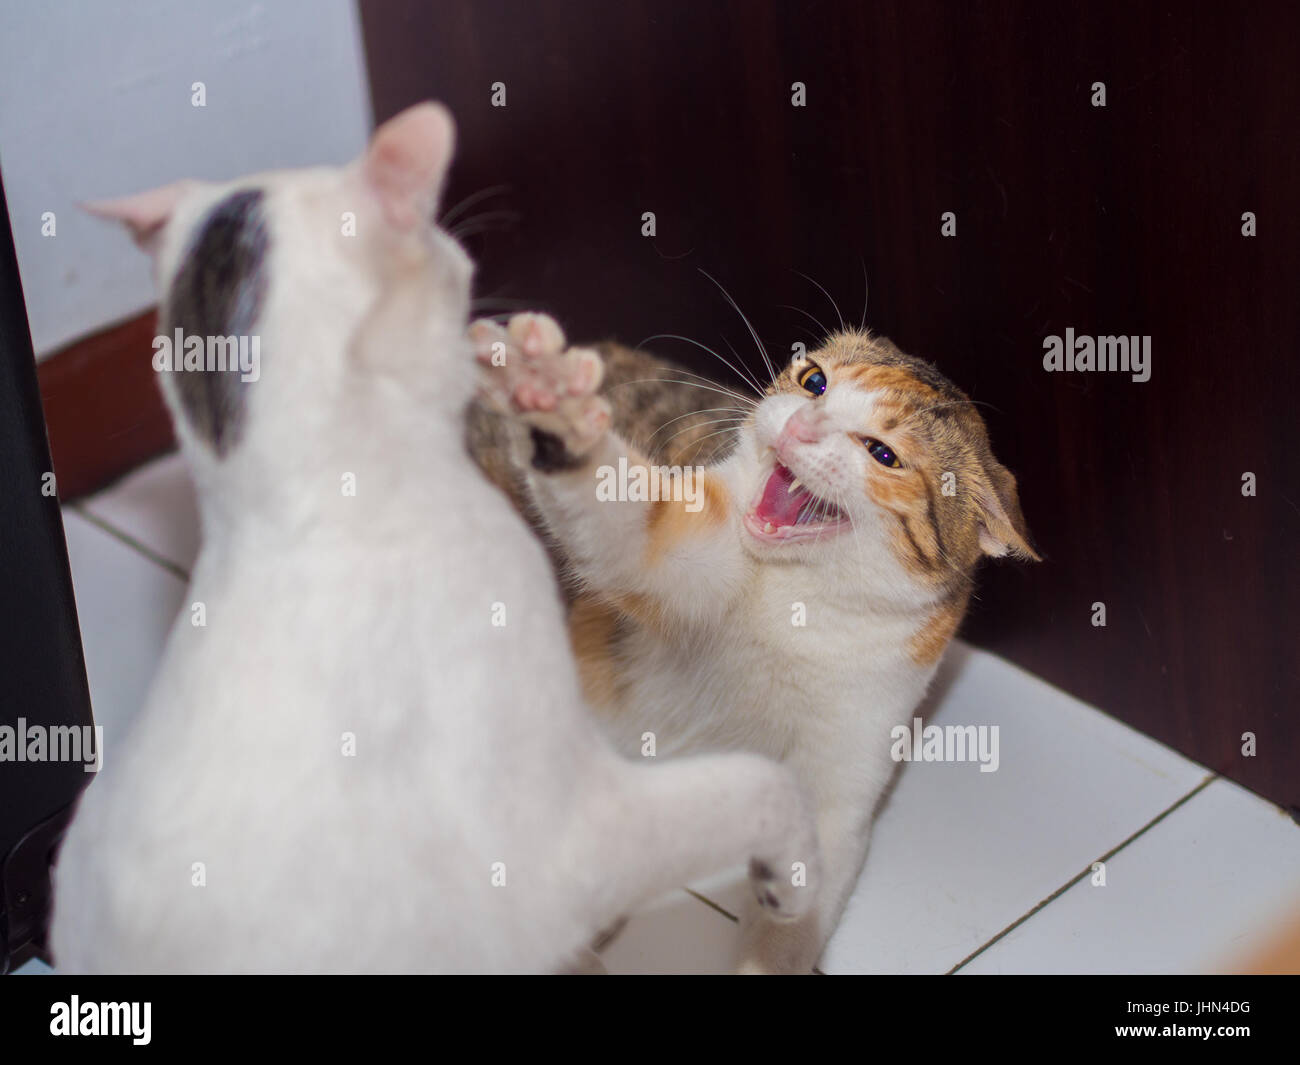 Fighting Cat with Fang Shown Stock Photo